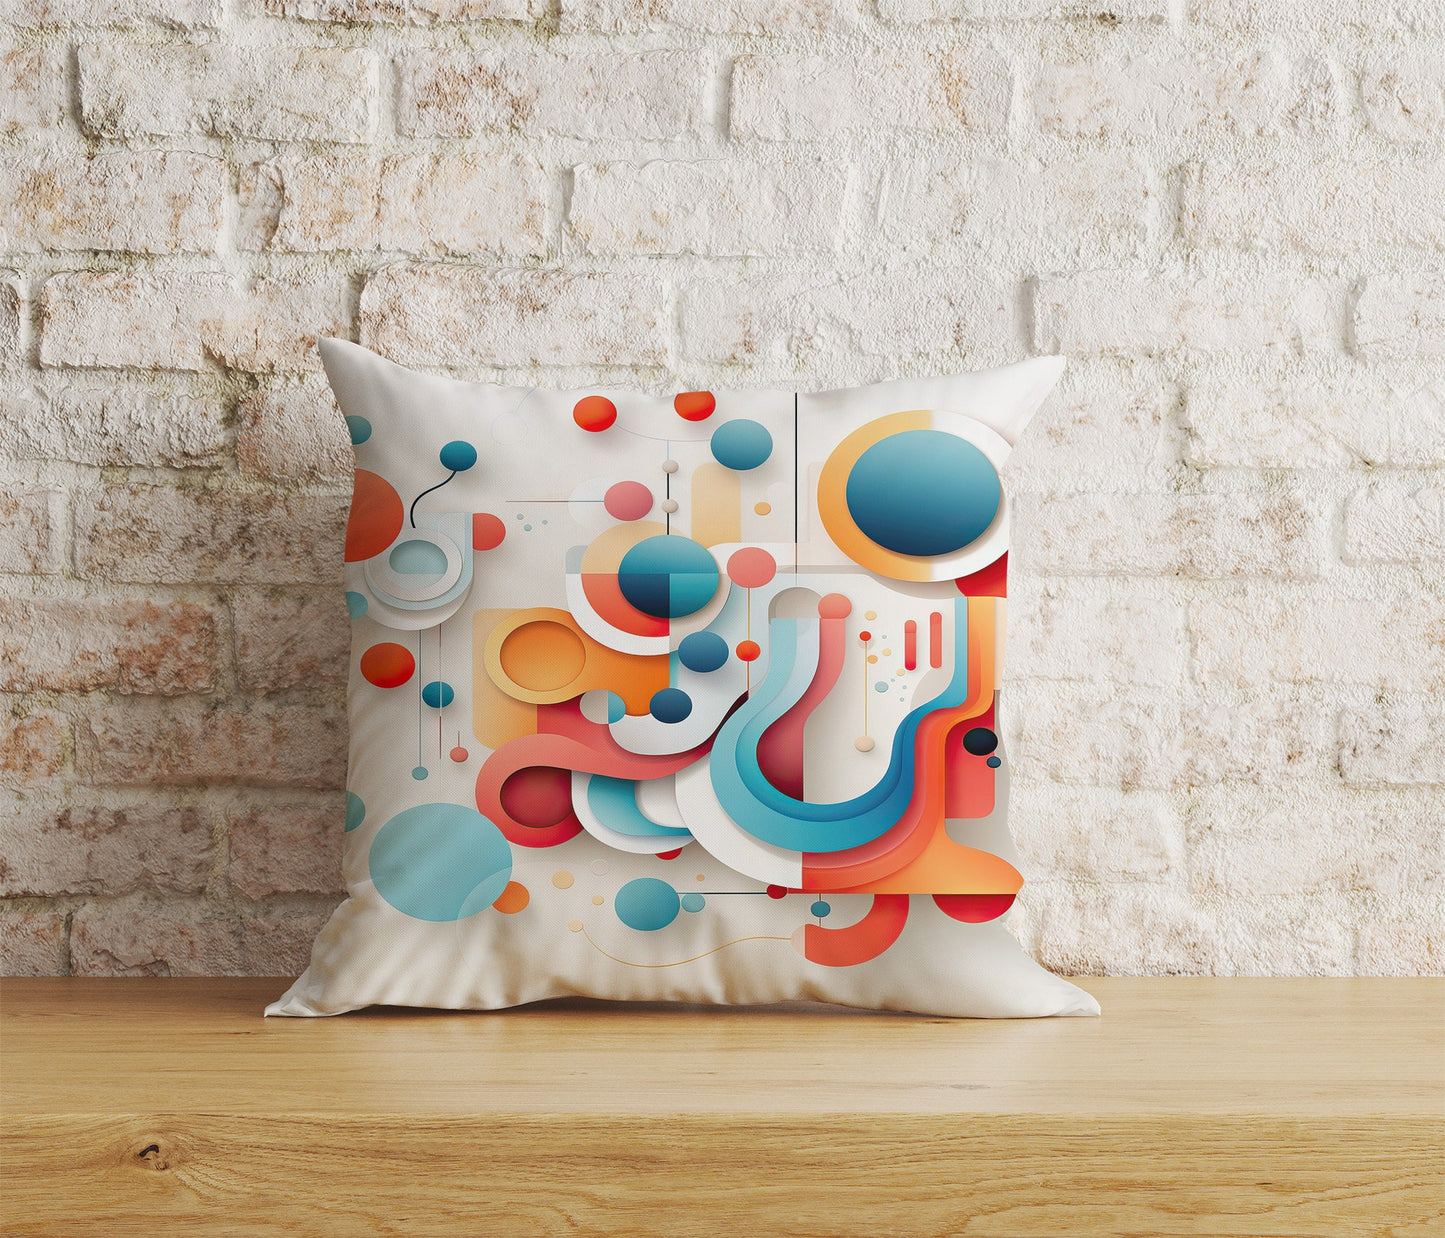 Abstract Colorful Cushion Cover Bedroom Pillow Cover